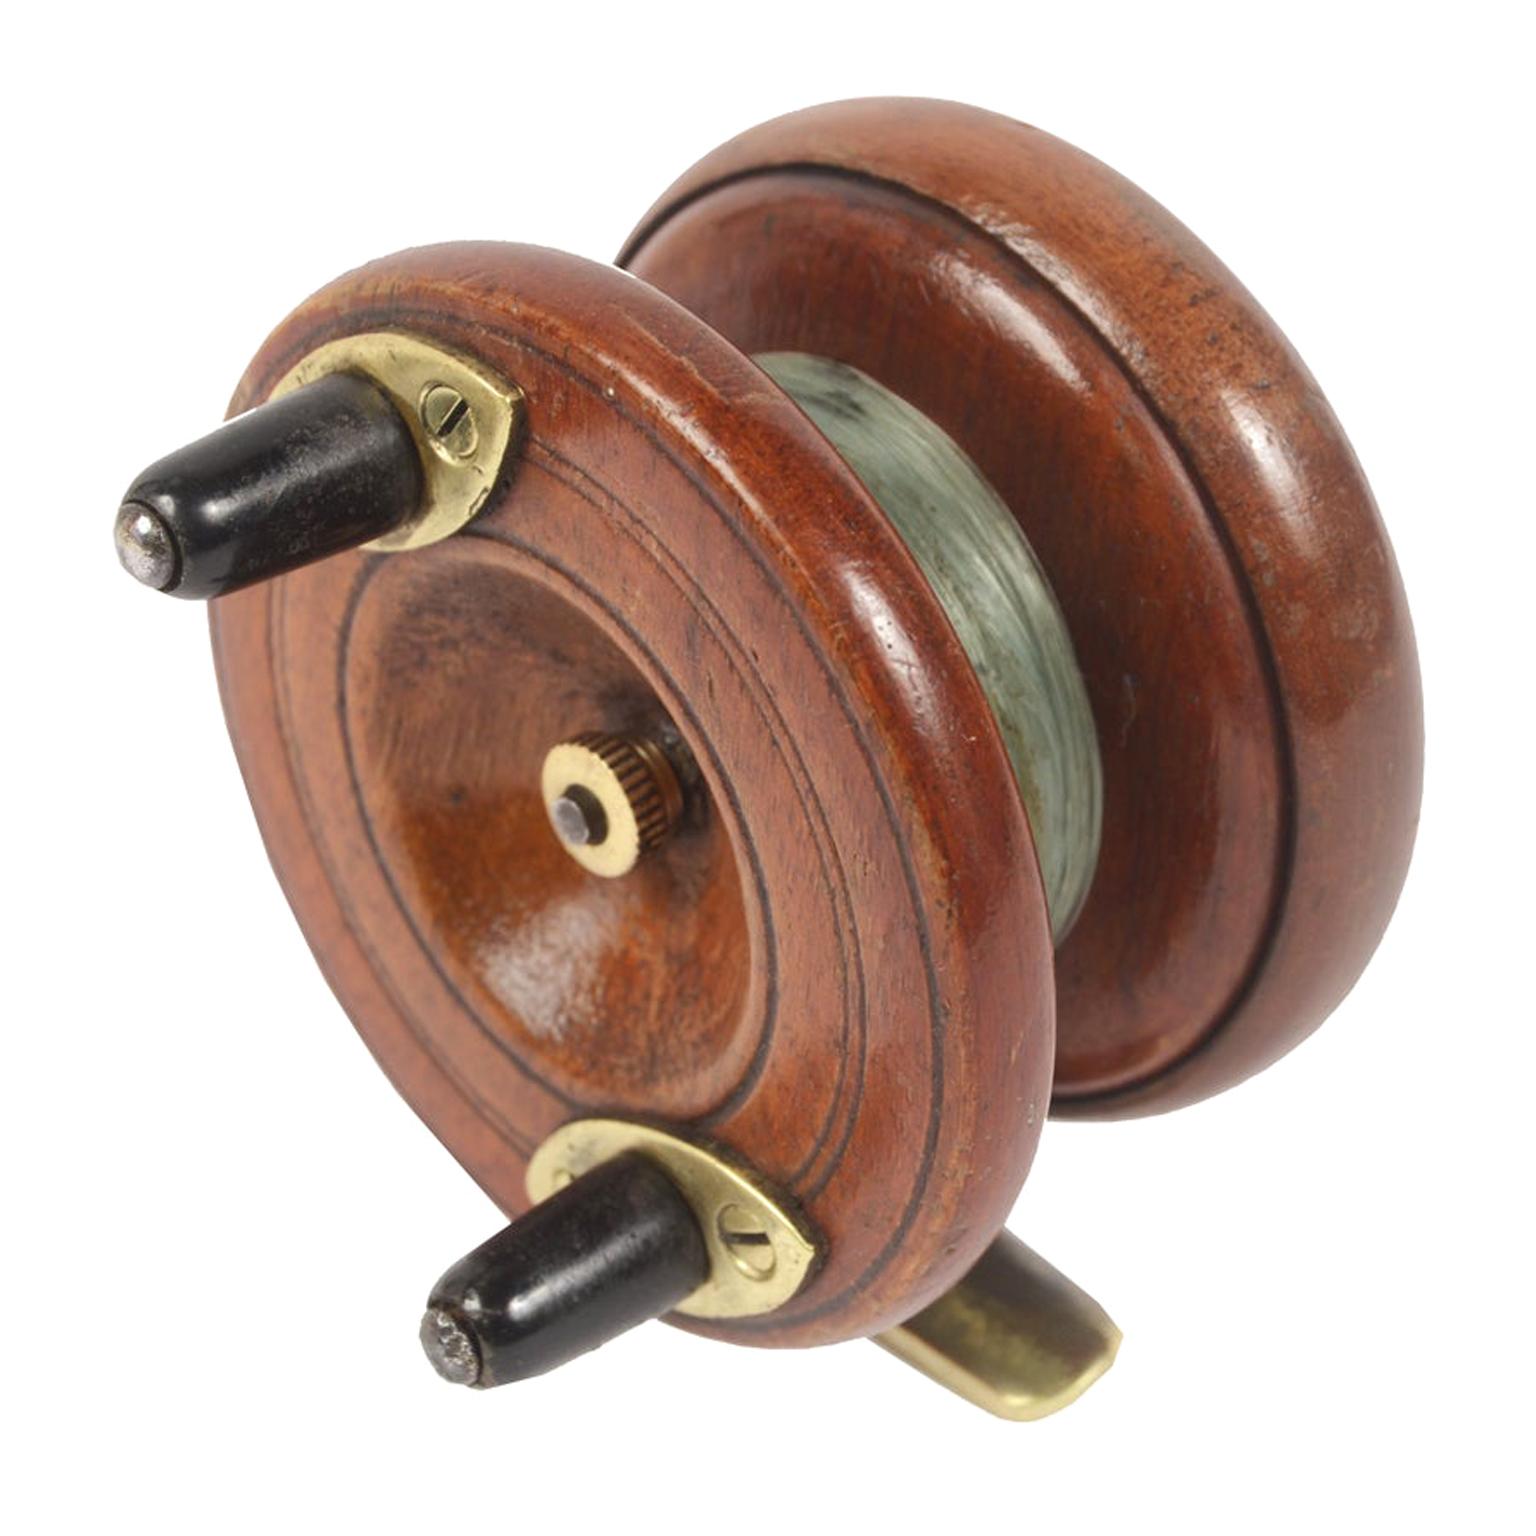 Fishing Reel Made of Turned Oak and Brass, UK, Early 1900s